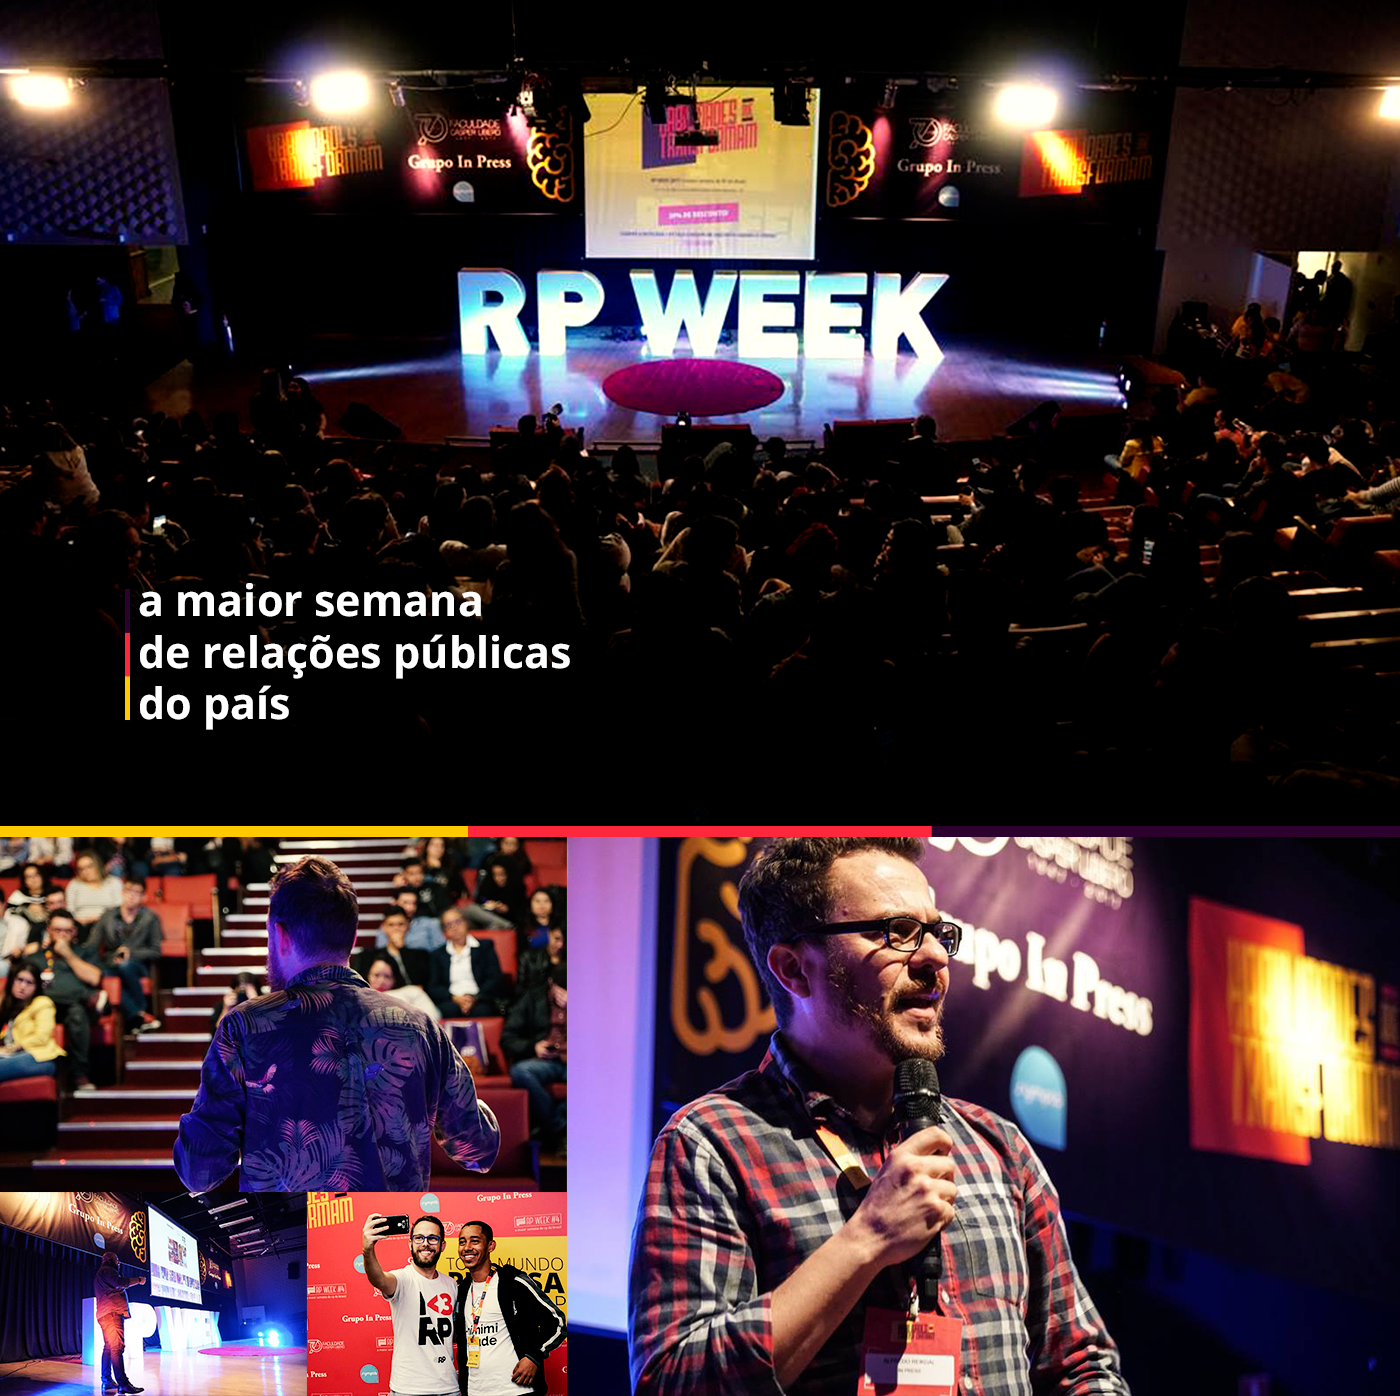 Evento Event identidade visual design banner site lecture visual identity Layout color